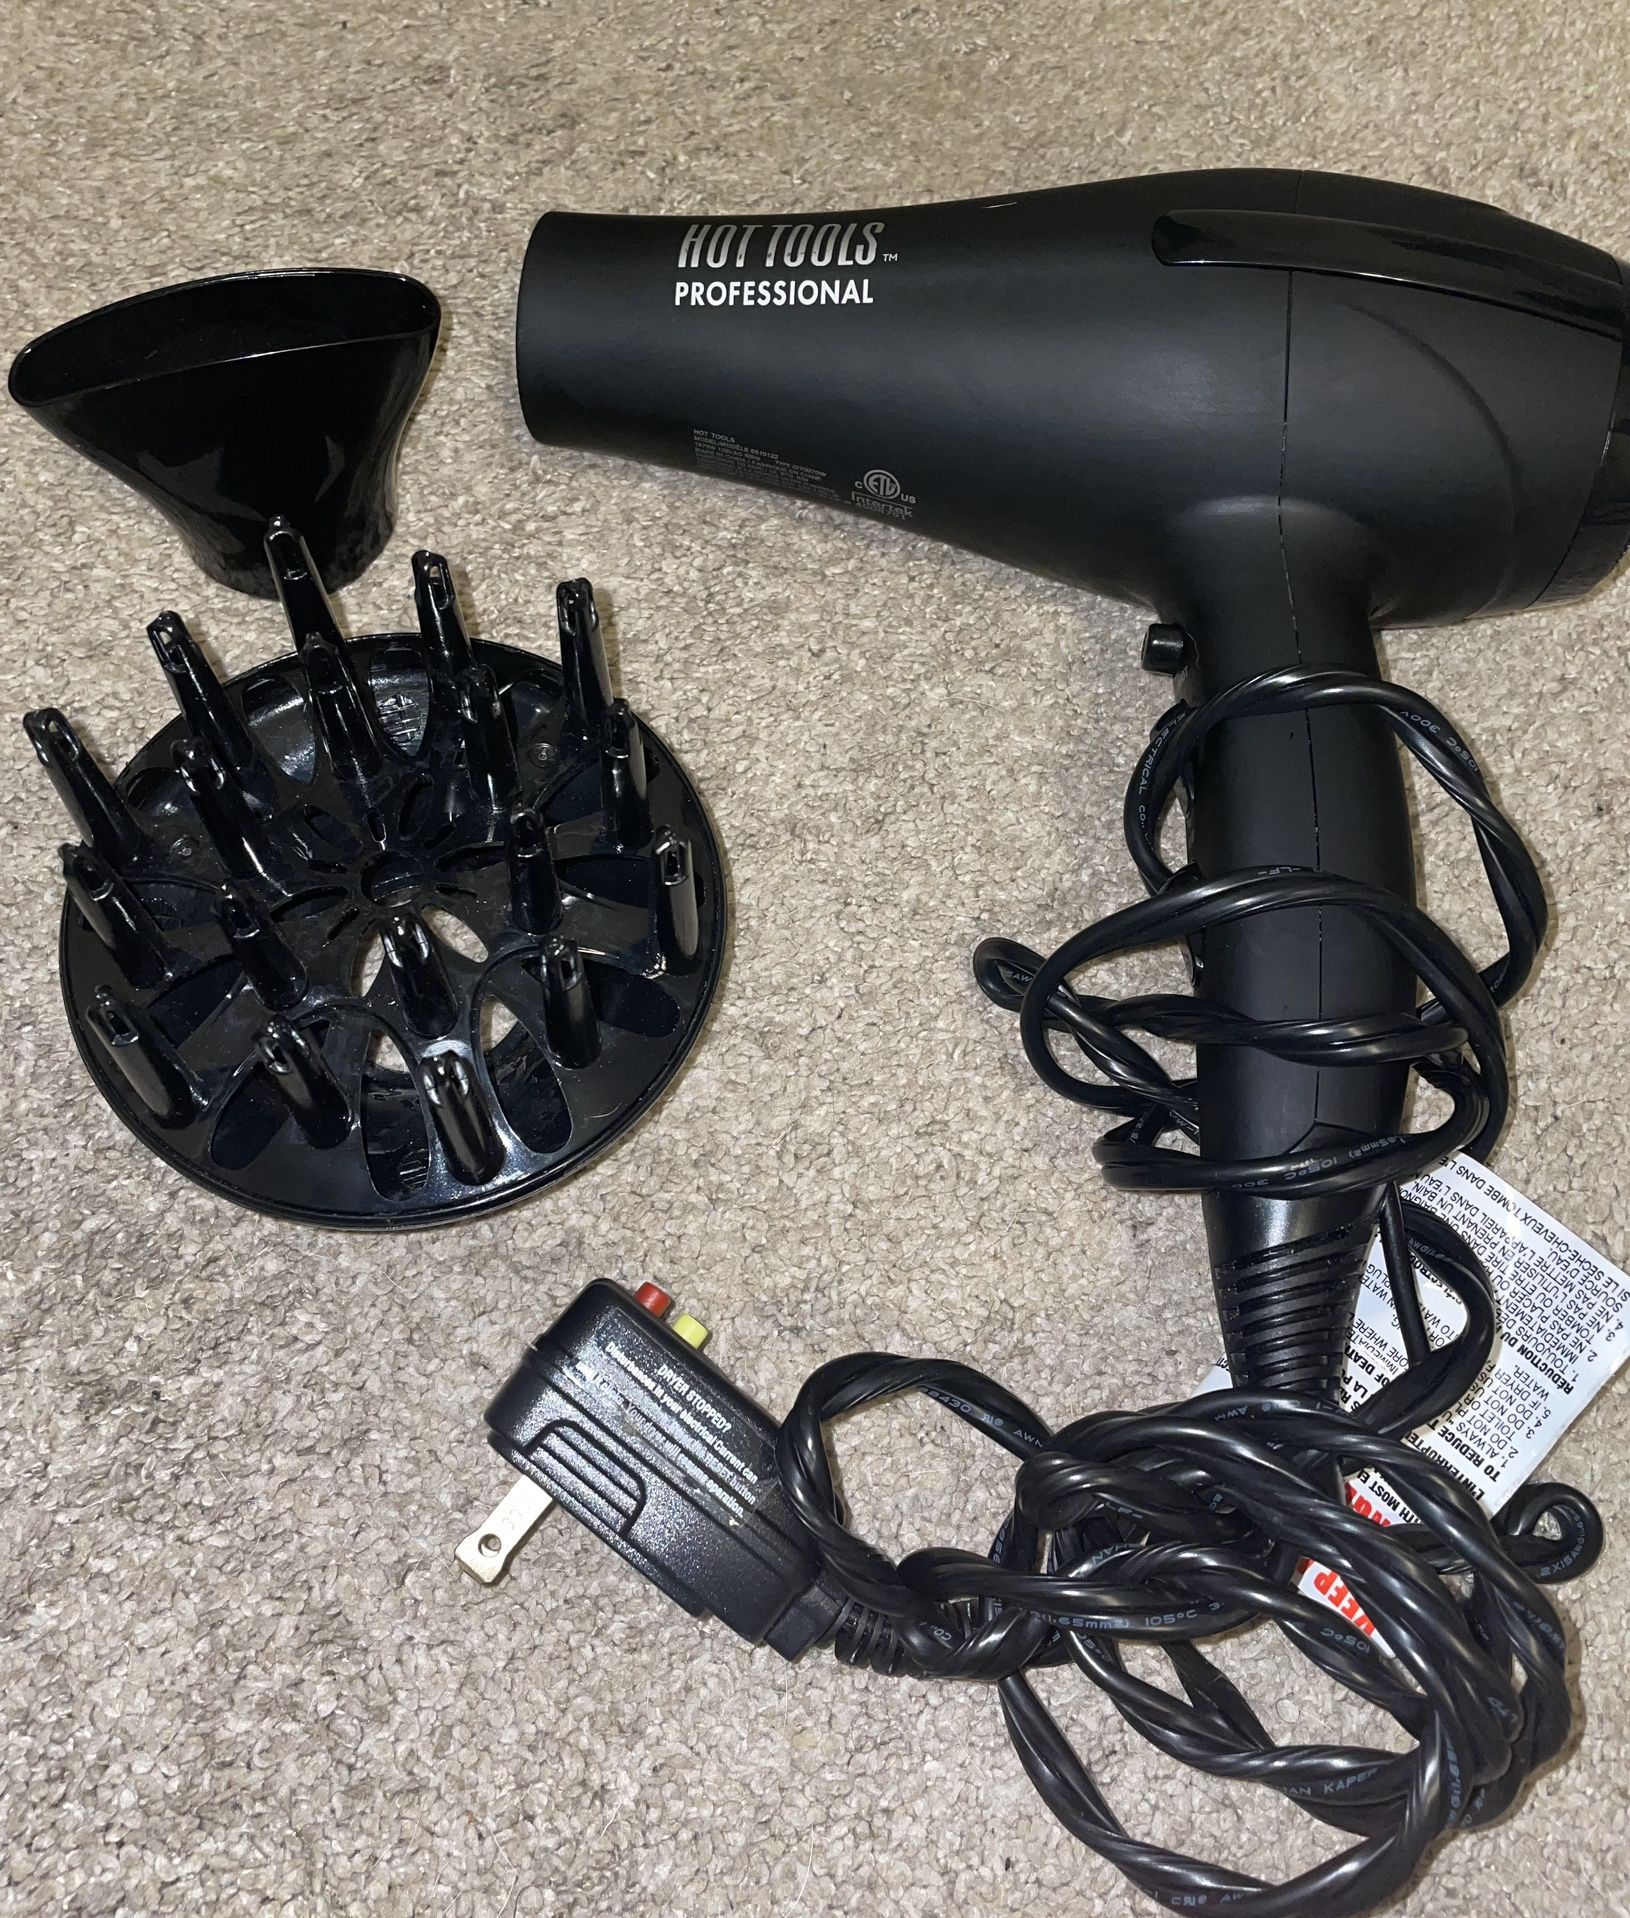 Hot Tools Professional Hair Dryer